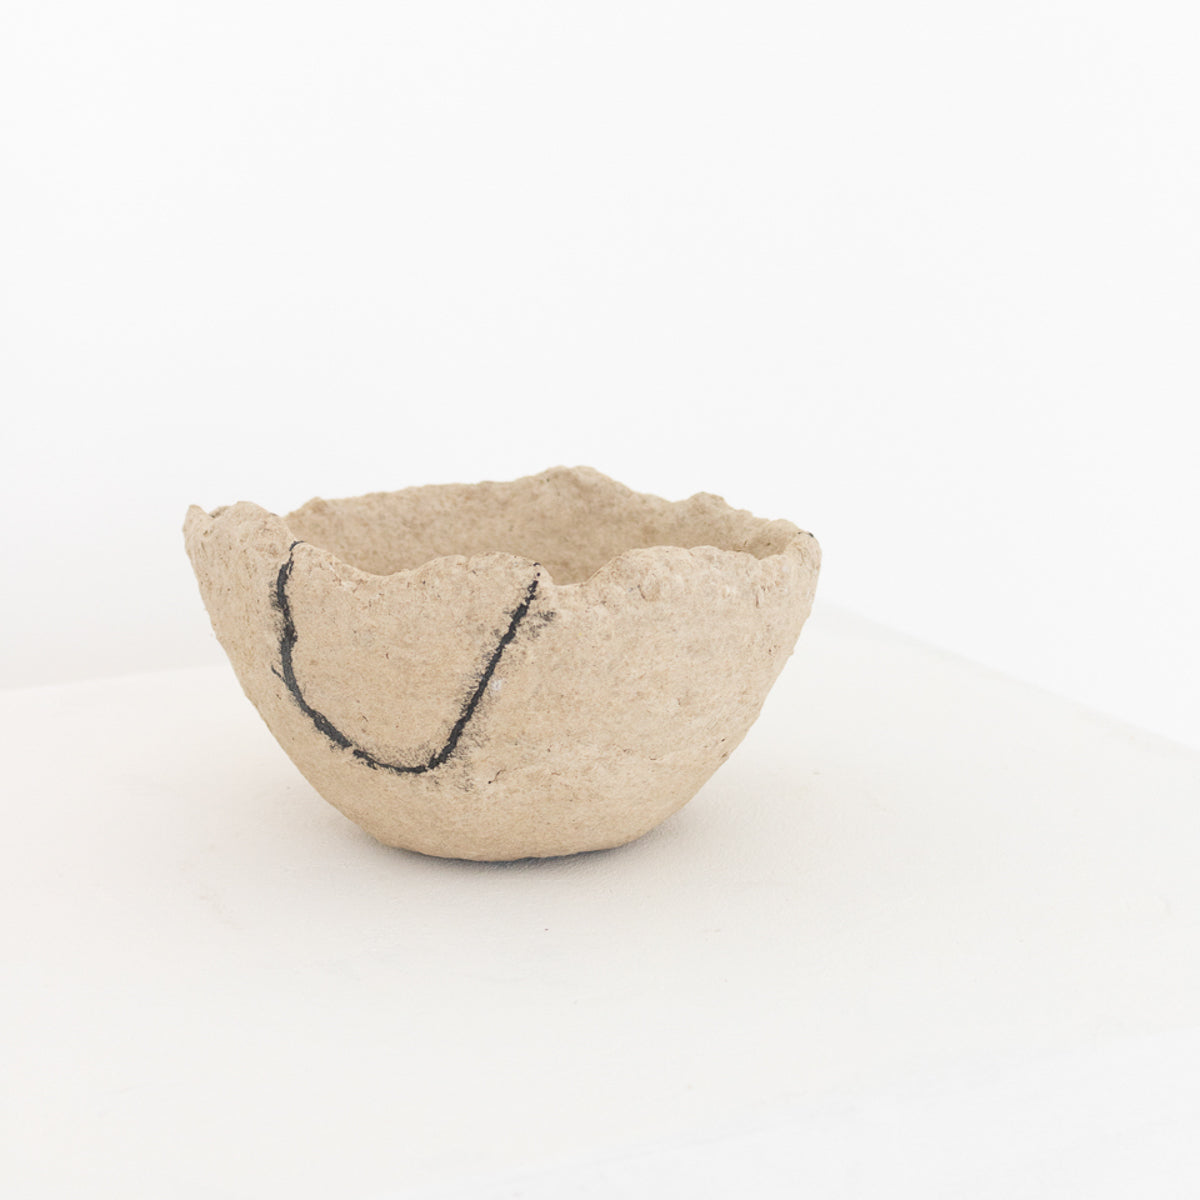 Handmade by Montana artist Jennifer Alden Design, Vessel Study No. 46 is a contemporary sculpture made from paper clay and charcoal. Each unique vessel in this collection is one-of-a-kind, rare, and both primitive and modern. Another angle.